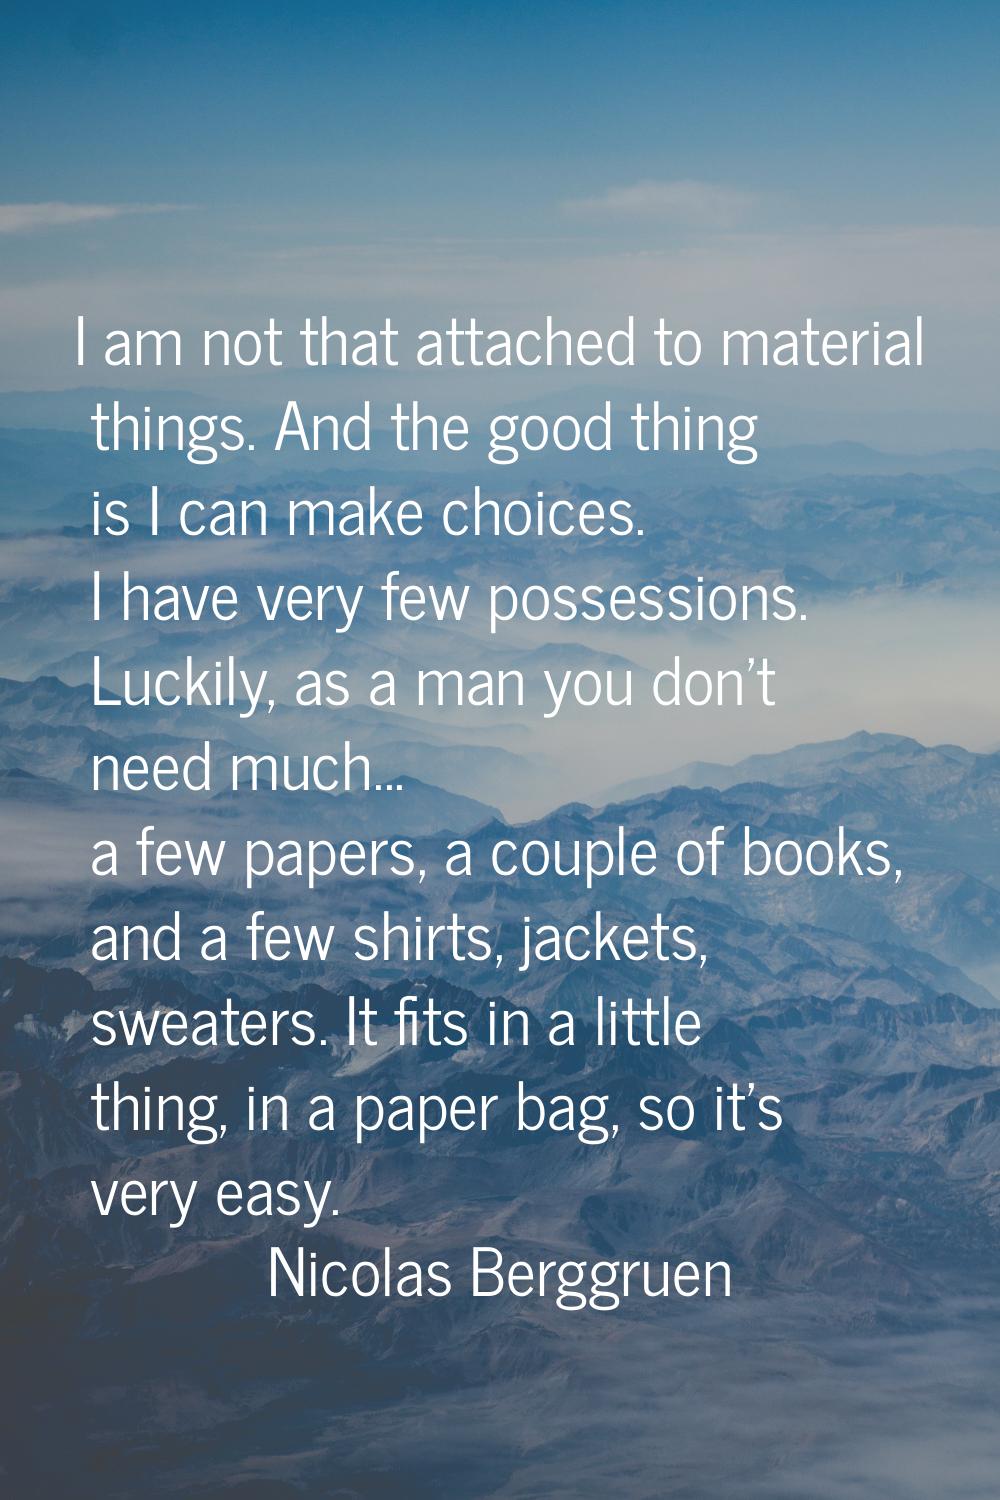 I am not that attached to material things. And the good thing is I can make choices. I have very fe